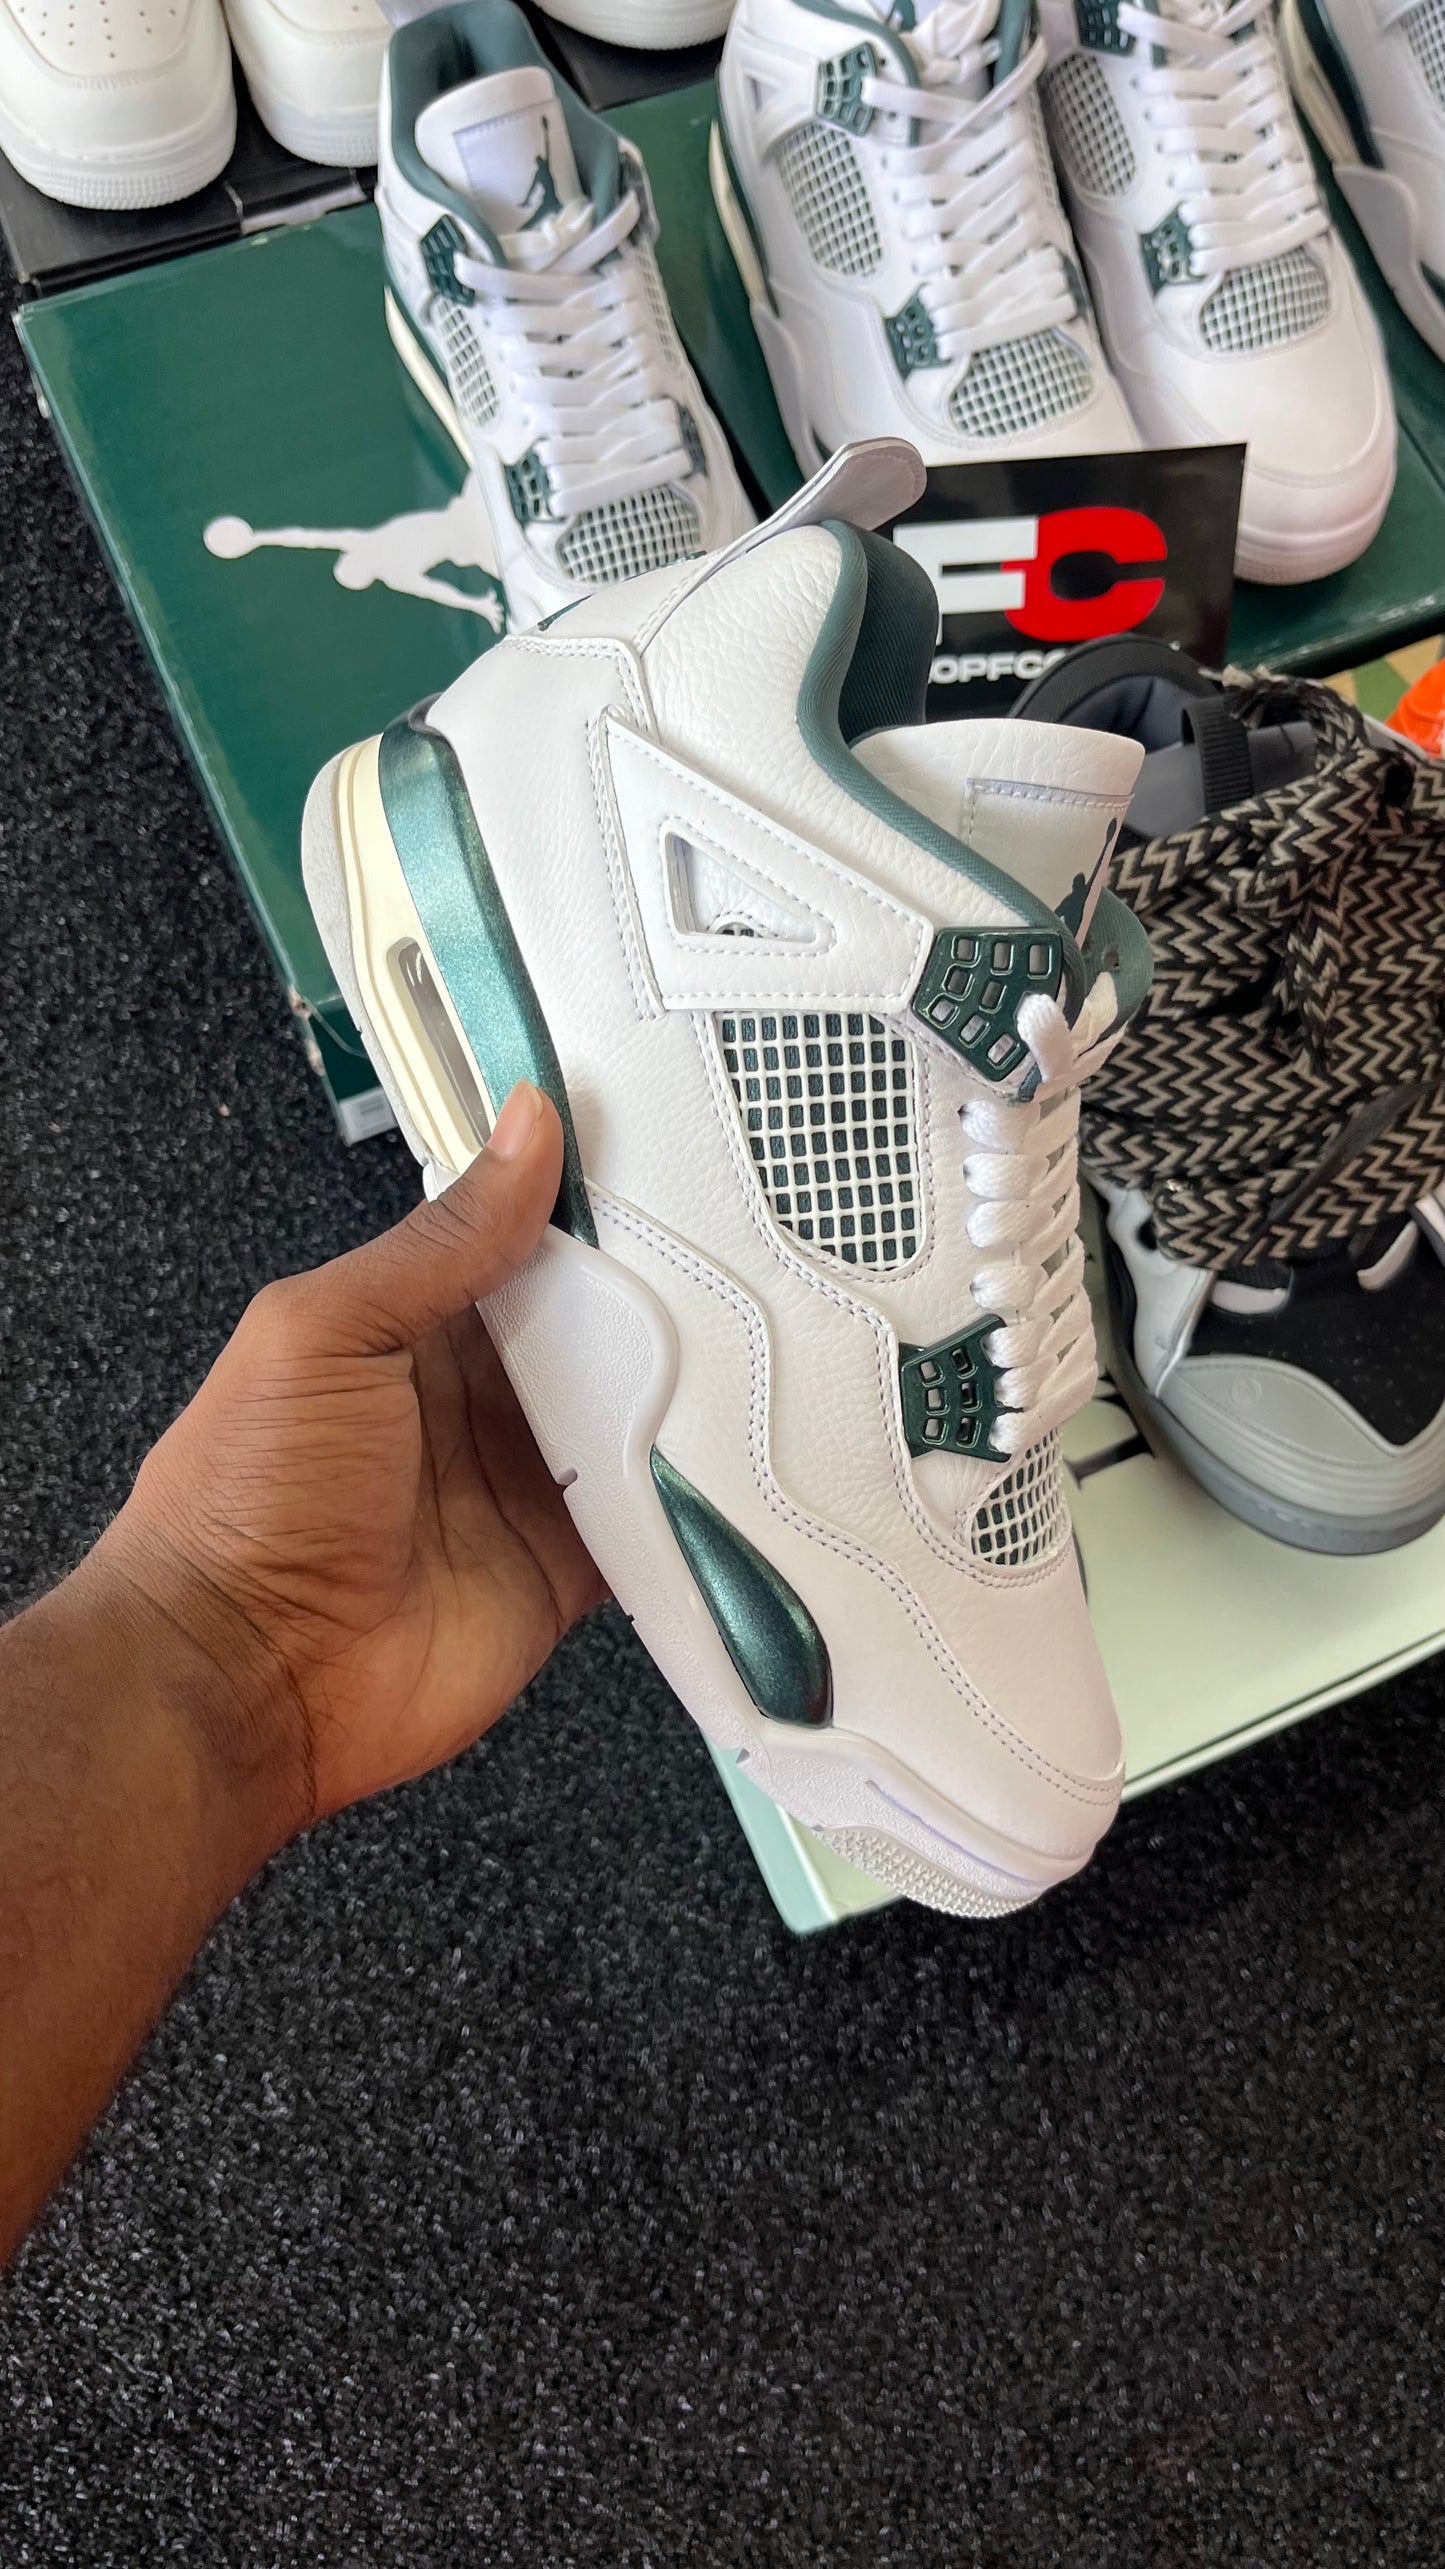 [ON HAND] OXIDIZED GREEN 4’s